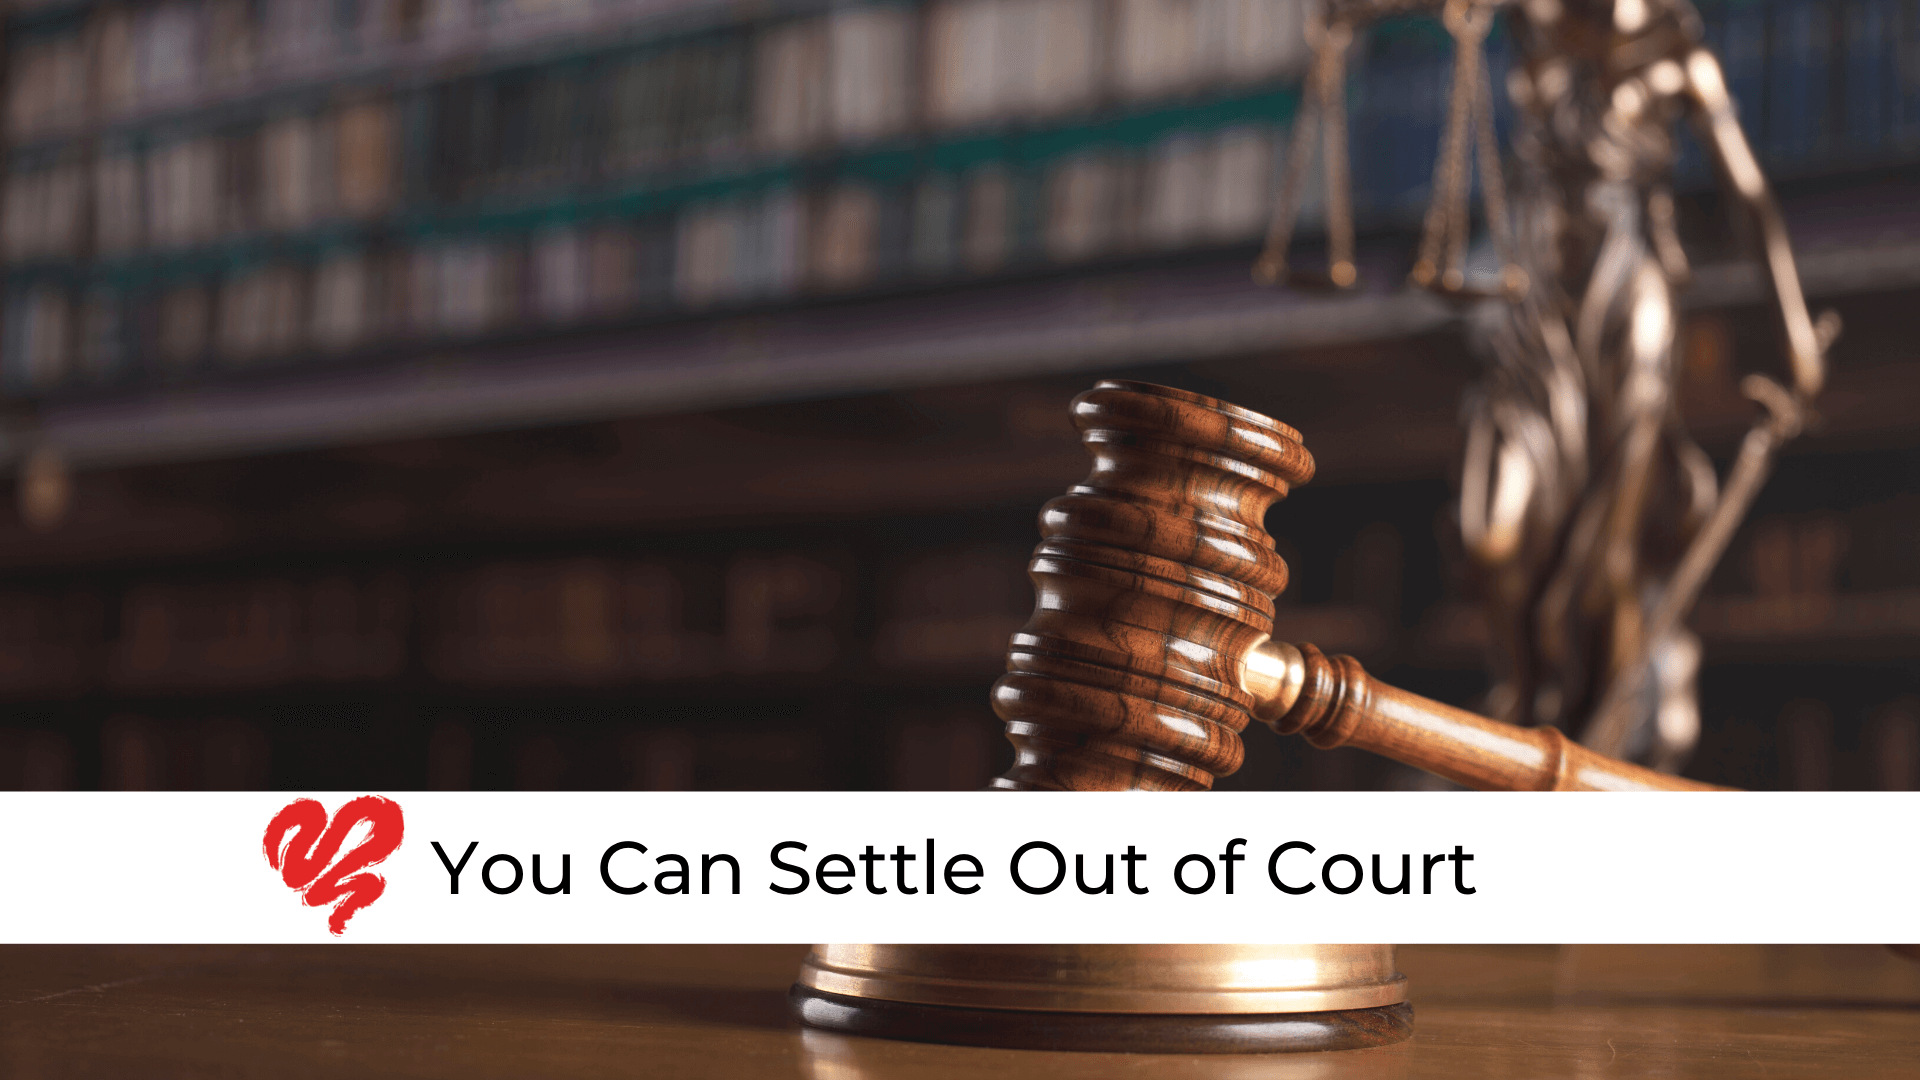 You Can Settle Out of Court